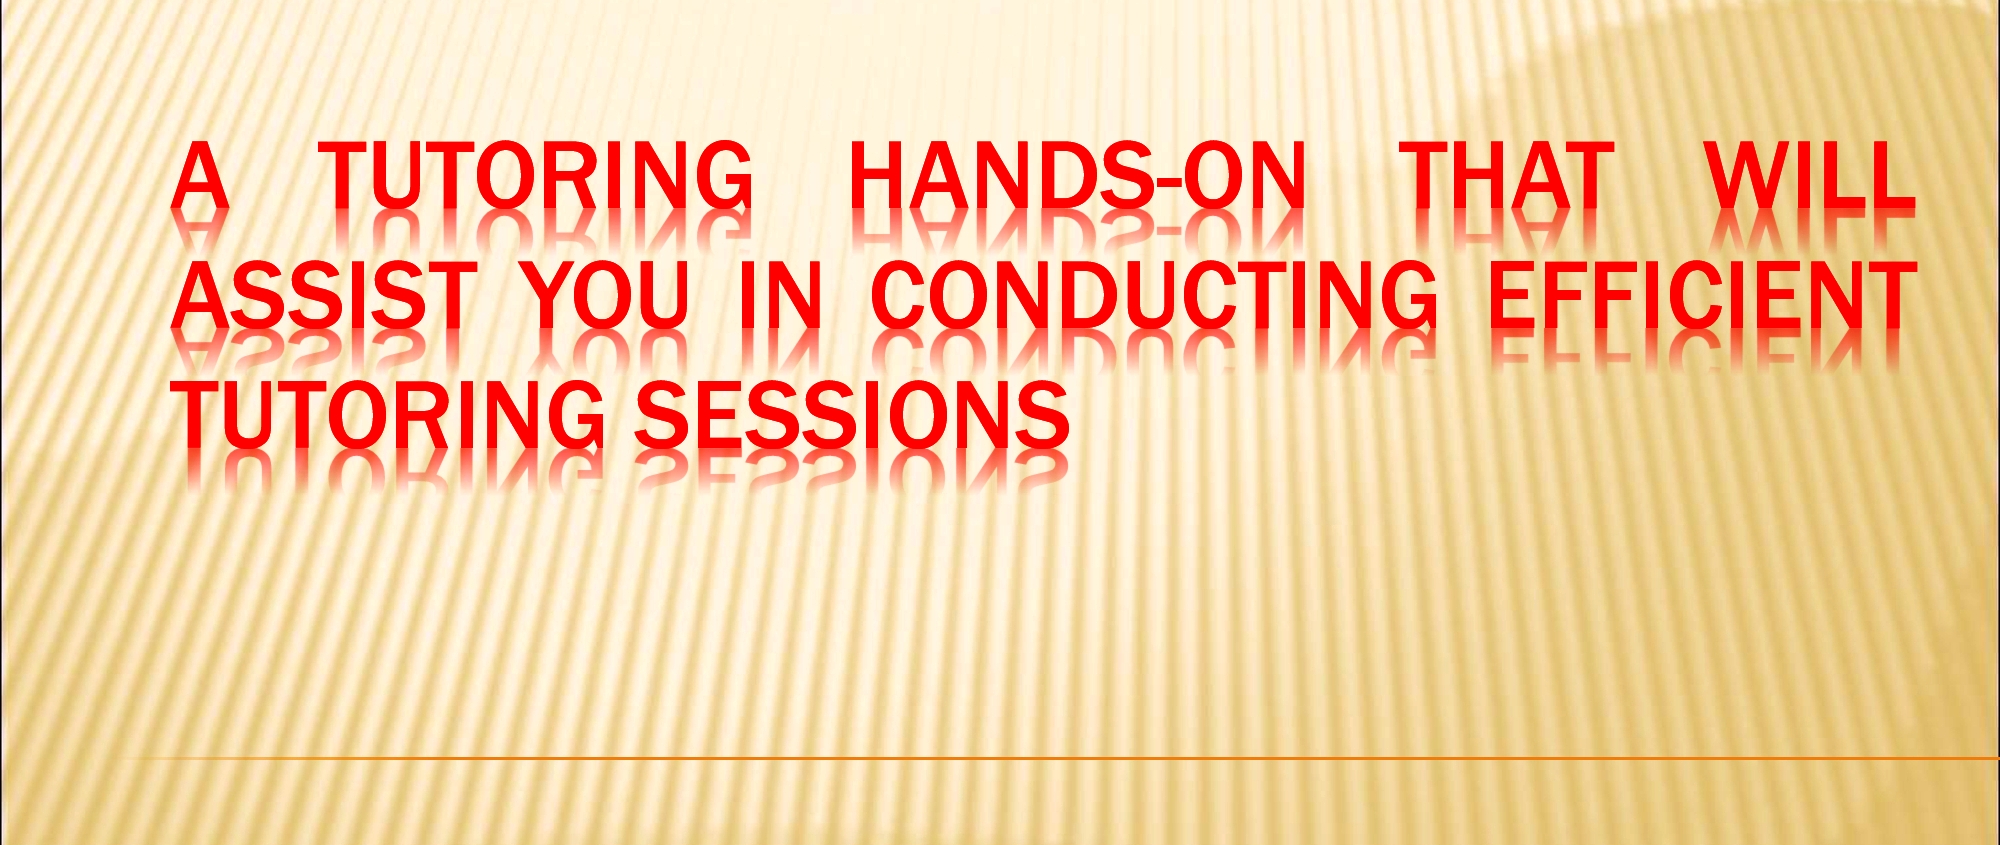 A tutoring hands-on that will assist you in conducting efficient tutoring sessions